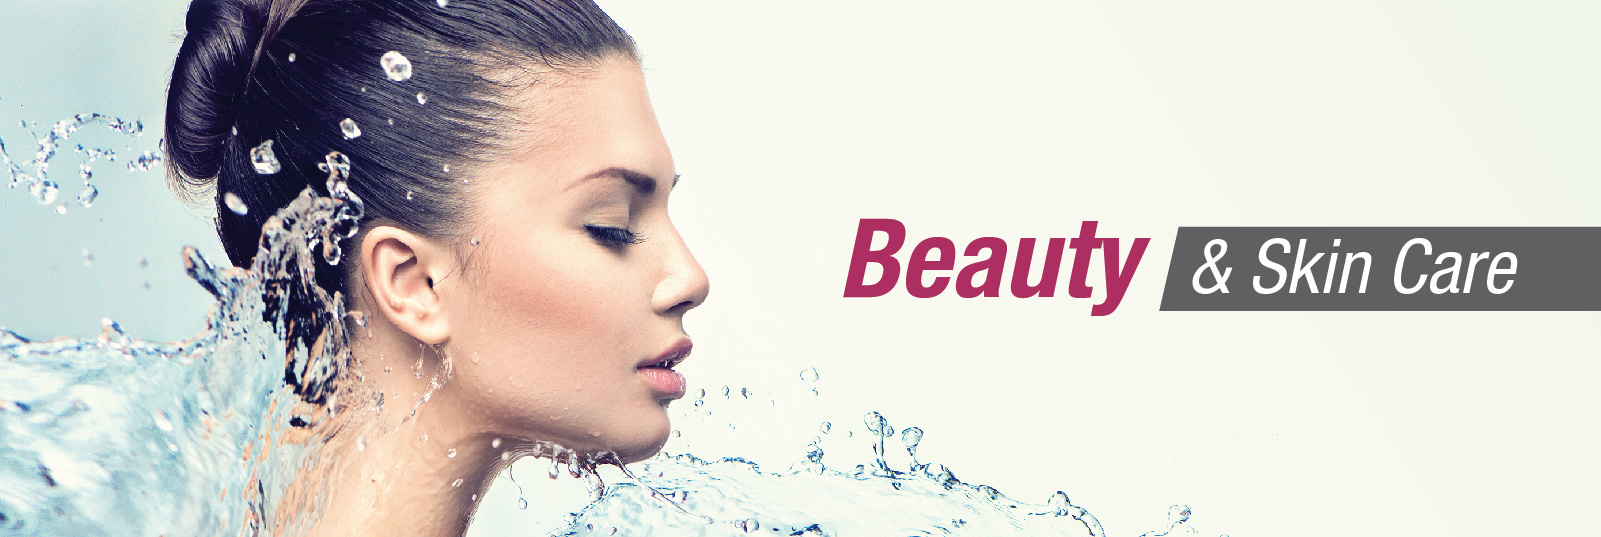 buy beauty care personal care products online